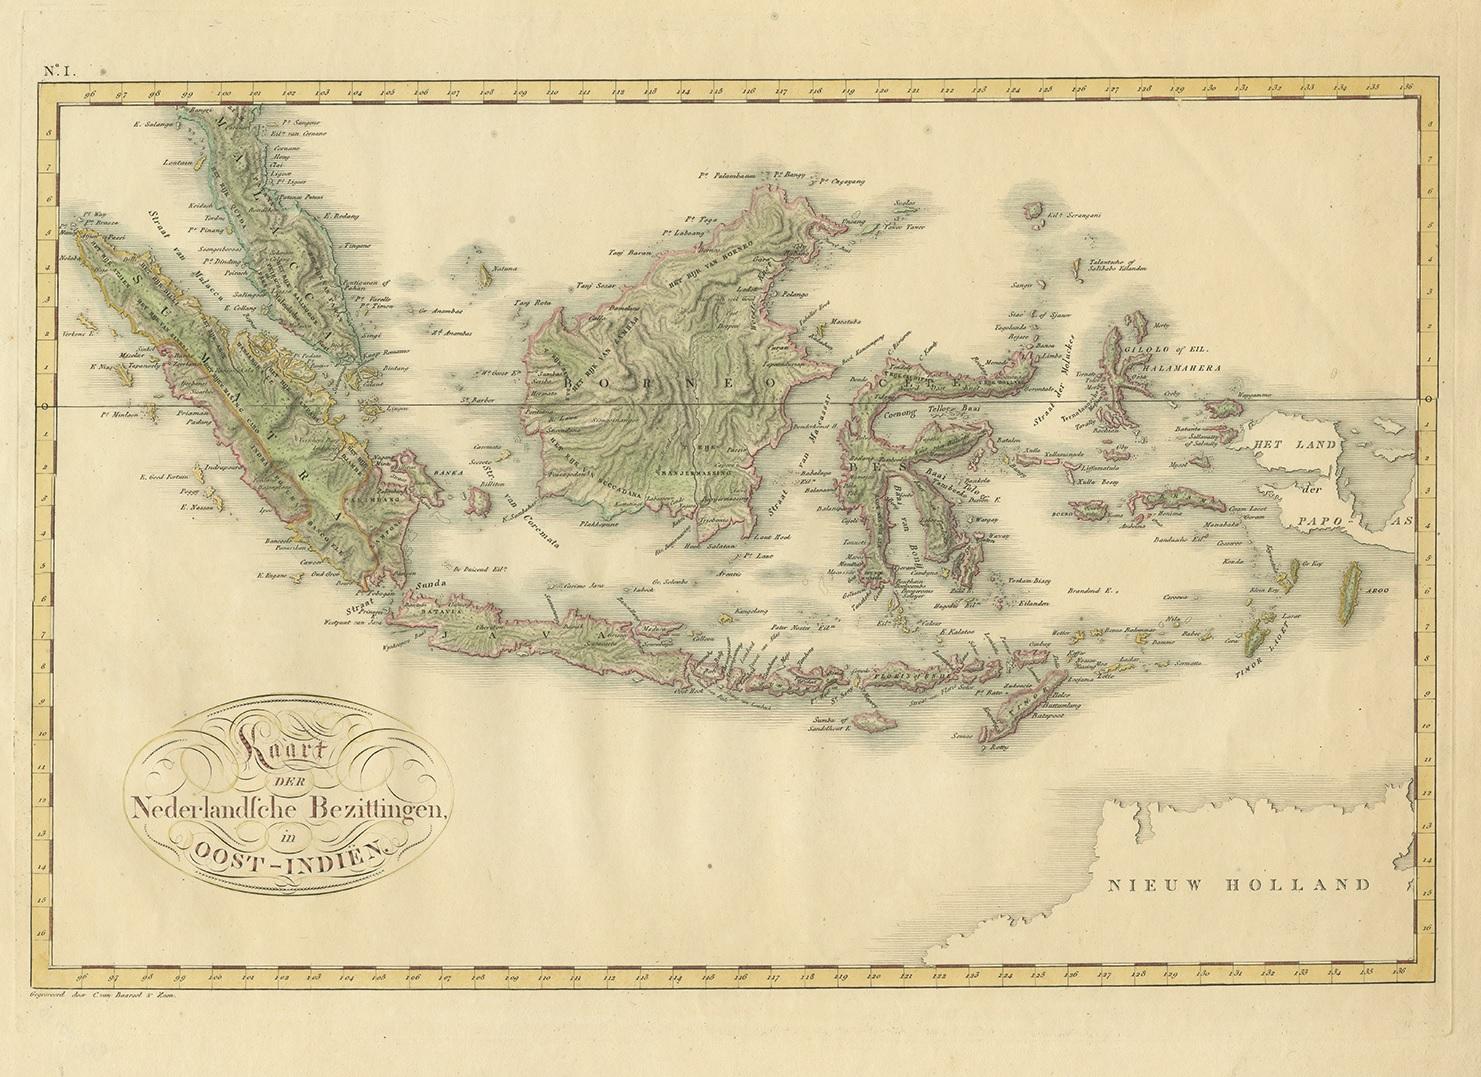 Antique map titled 'Kaart der Nederlandsche Bezittingen in Oost-Indiën'. 

Rare and attractive map of the Dutch East Indies, it shows the Dutch possessions in the 19th century. This colony was one of the most valuable European colonies under the